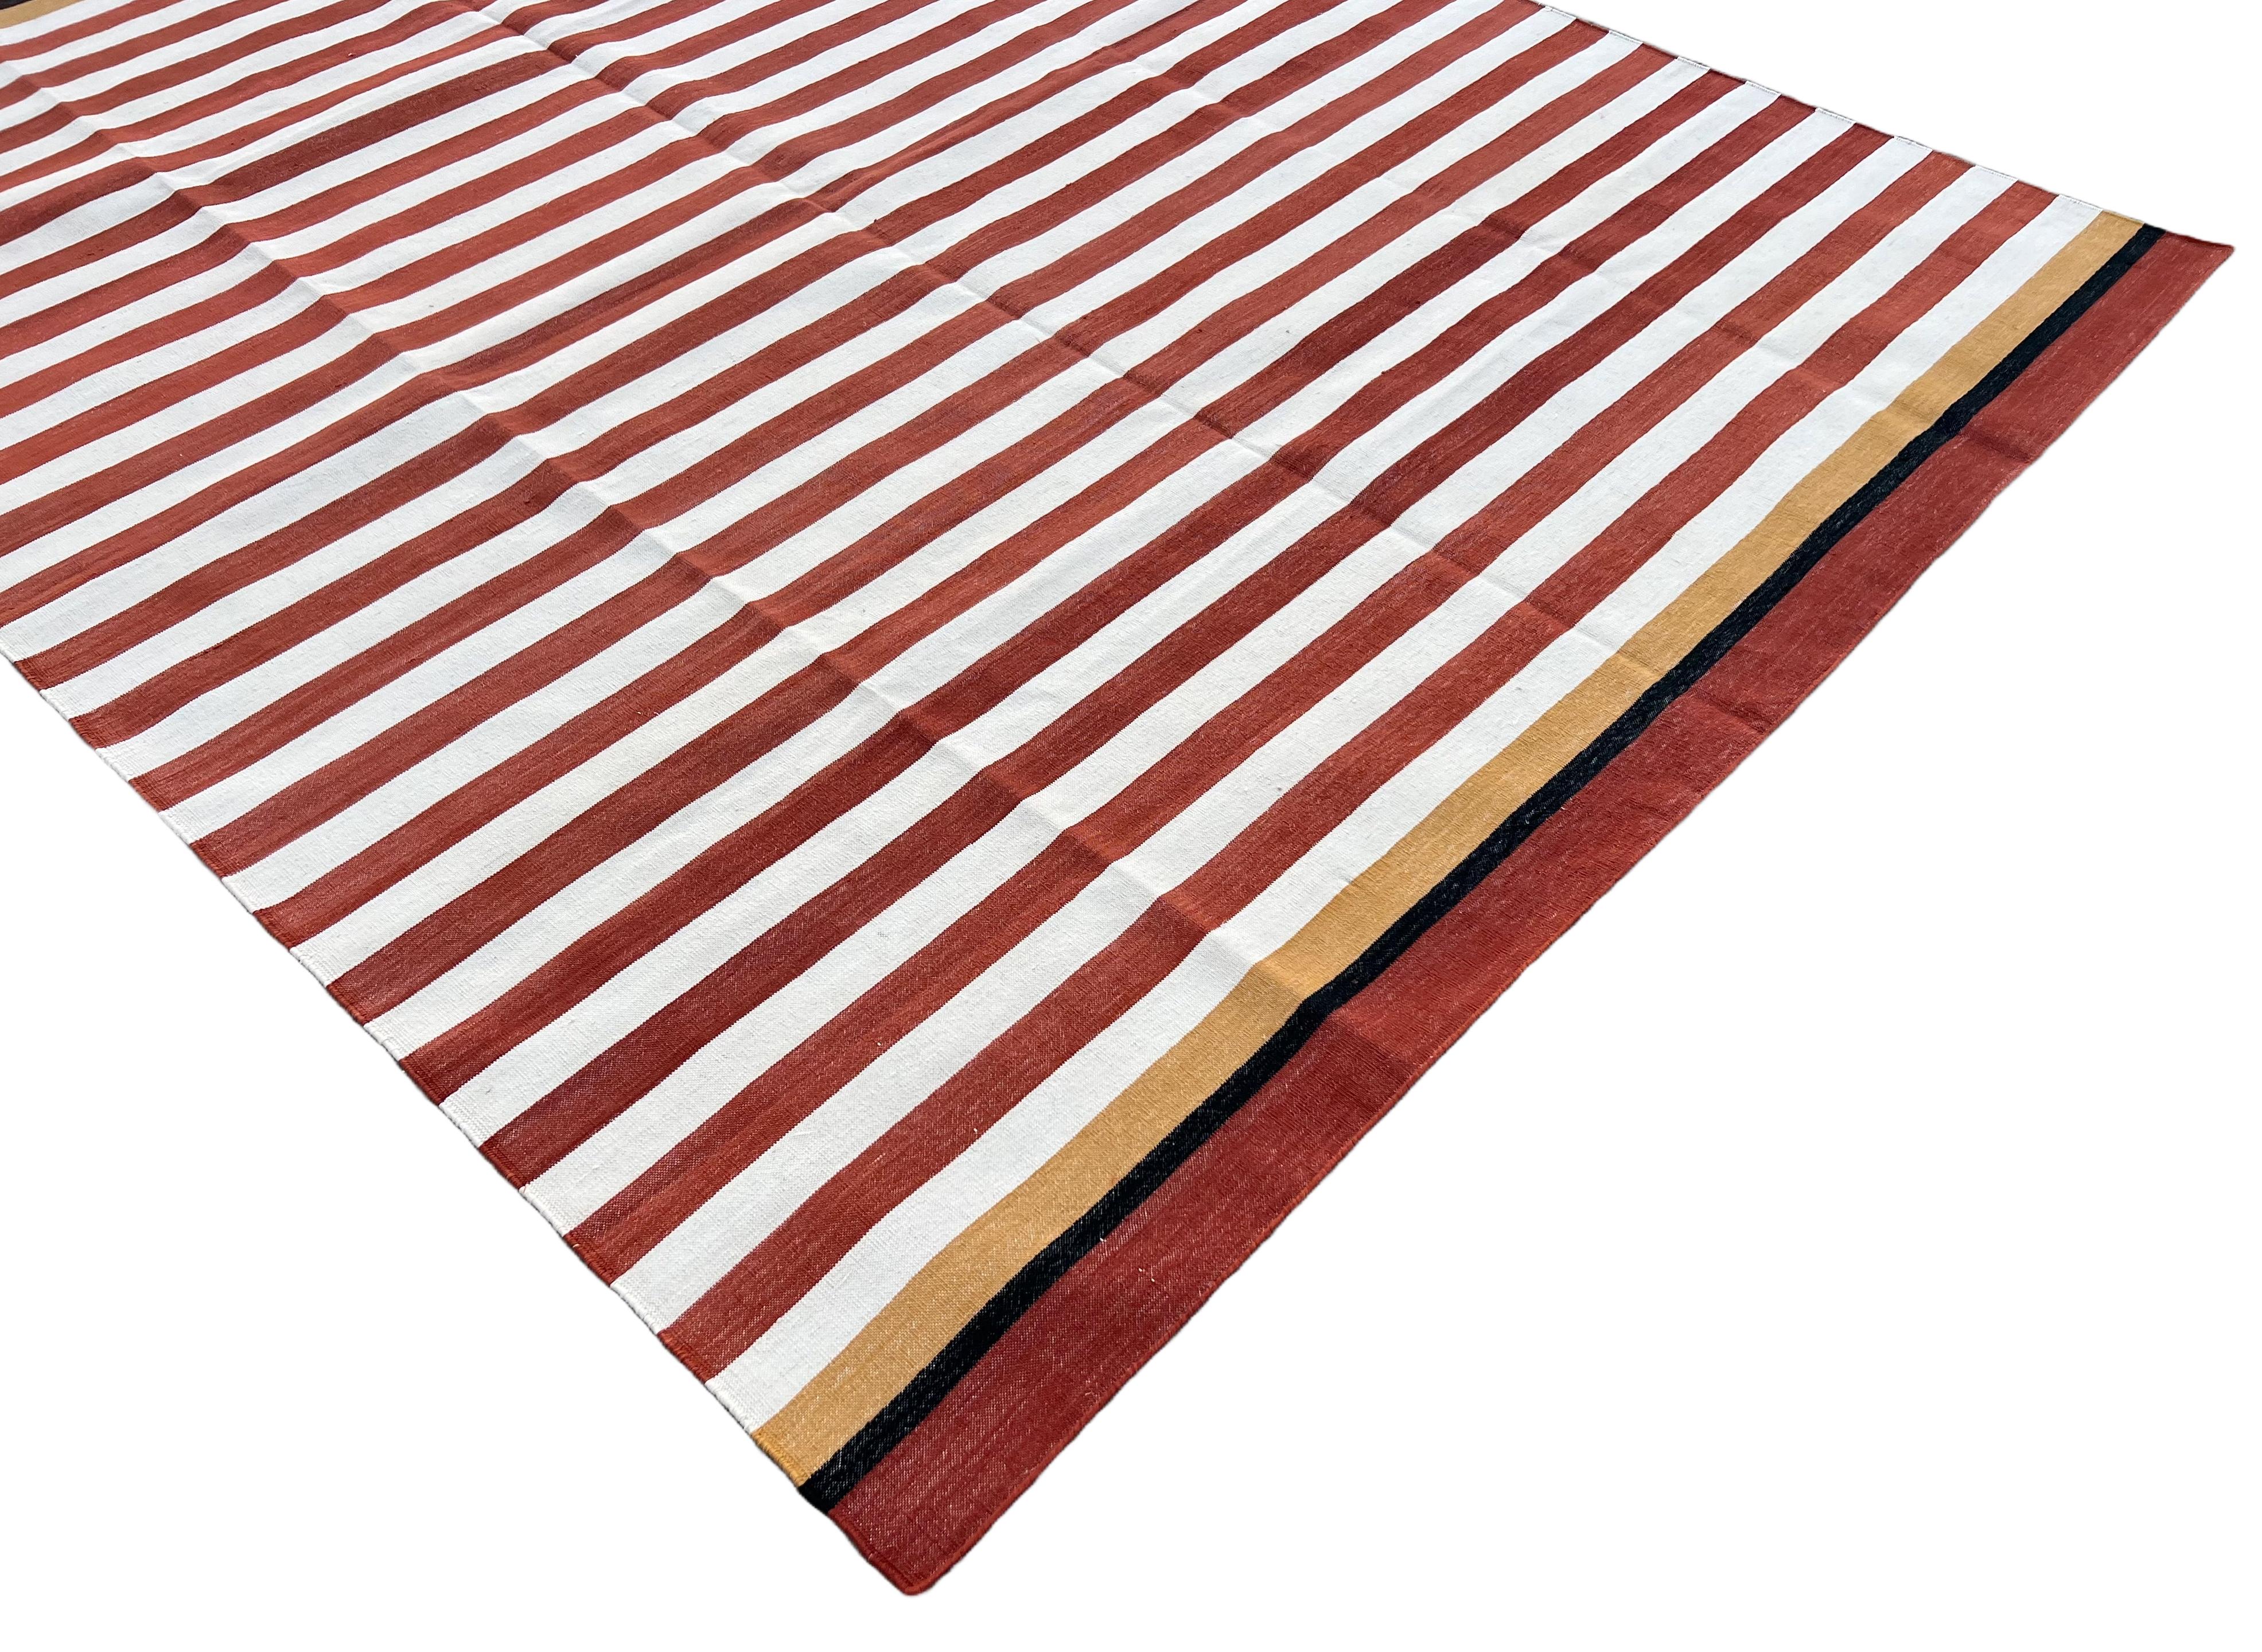 Hand-Woven Handmade Cotton Area Flat Weave Rug, 6x9 Red And White Stripe Indian Dhurrie Rug For Sale